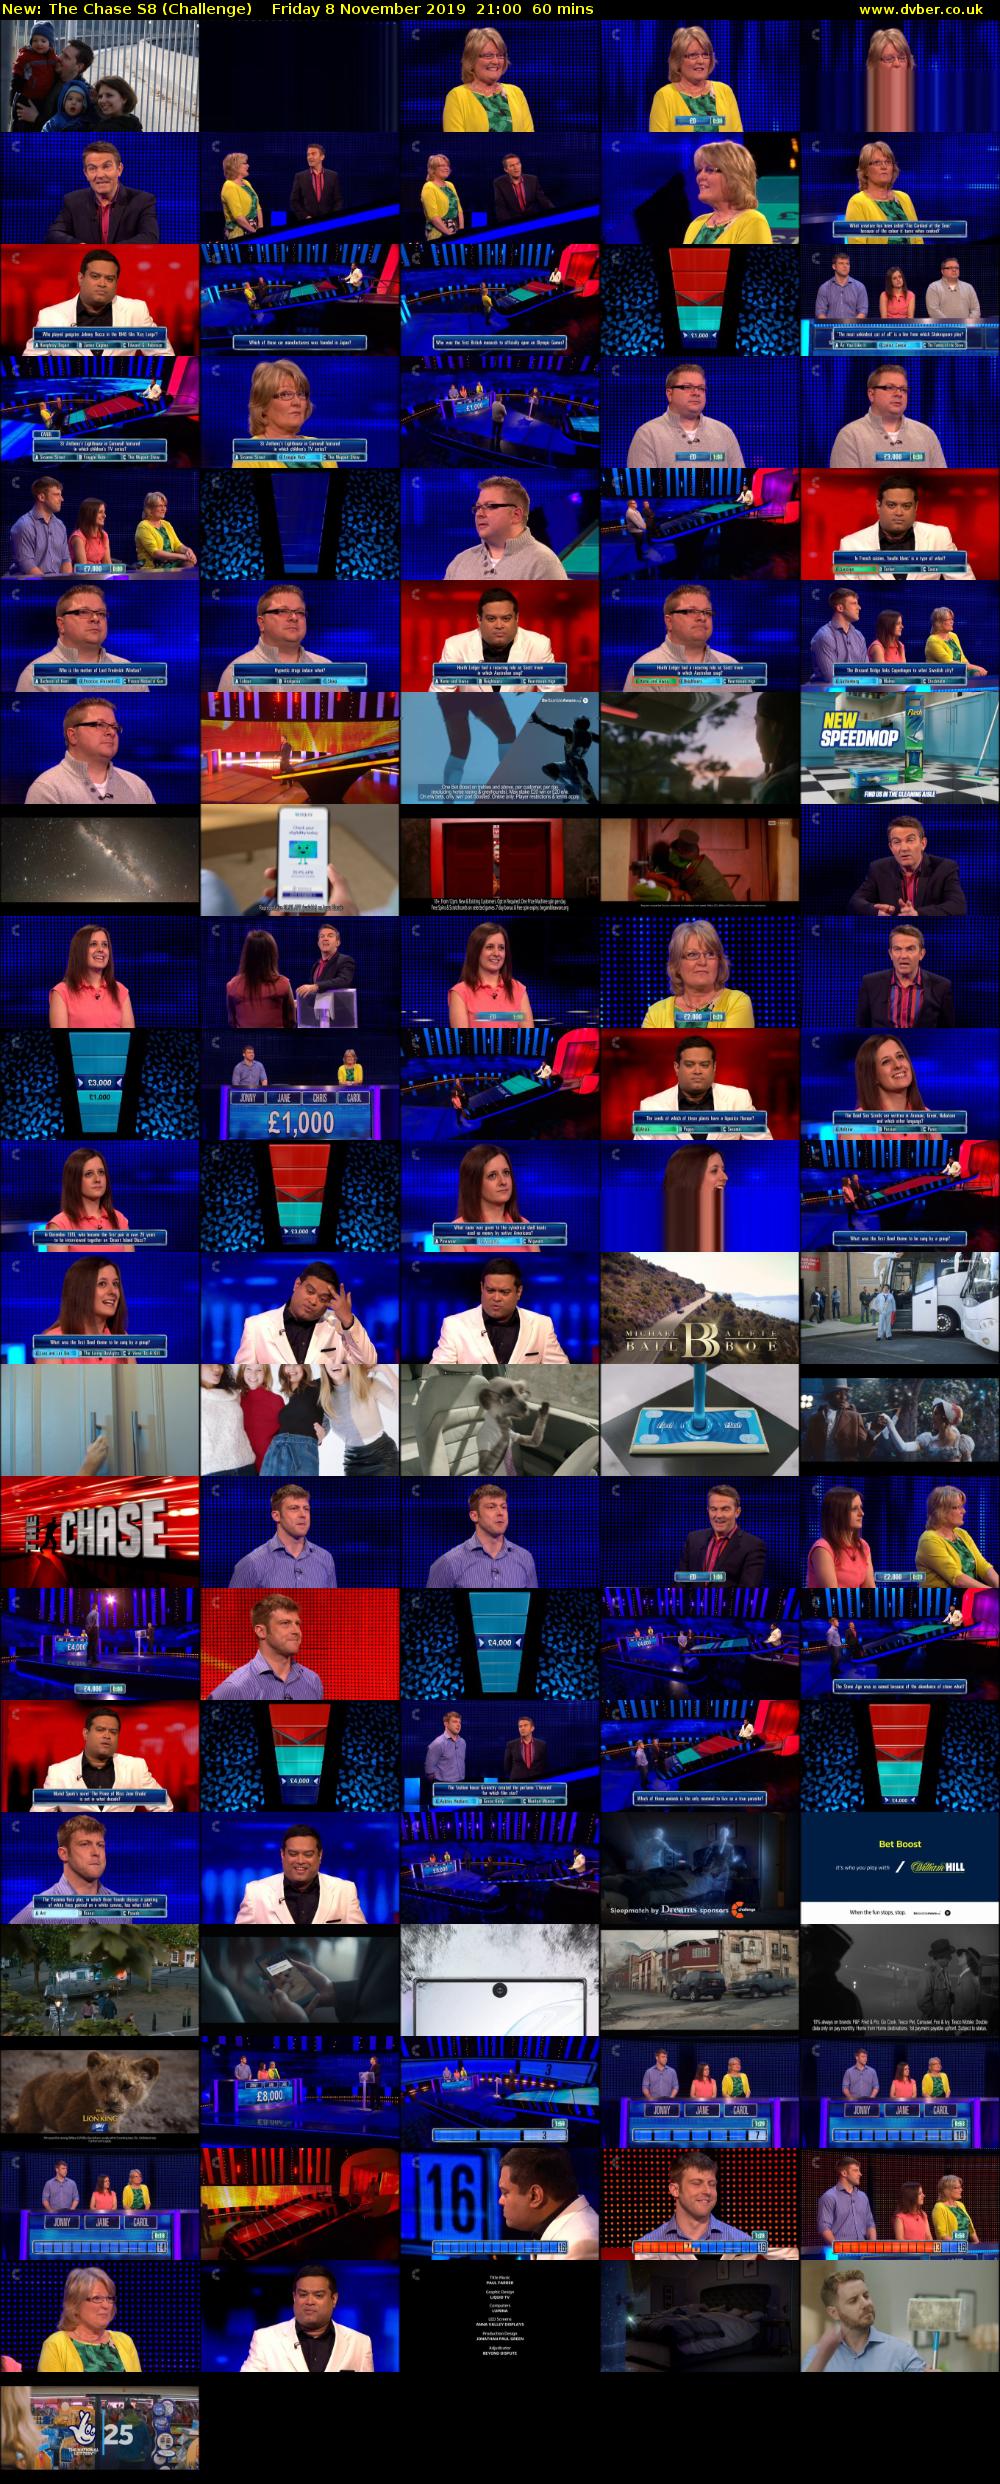 The Chase S8 (Challenge) Friday 8 November 2019 21:00 - 22:00